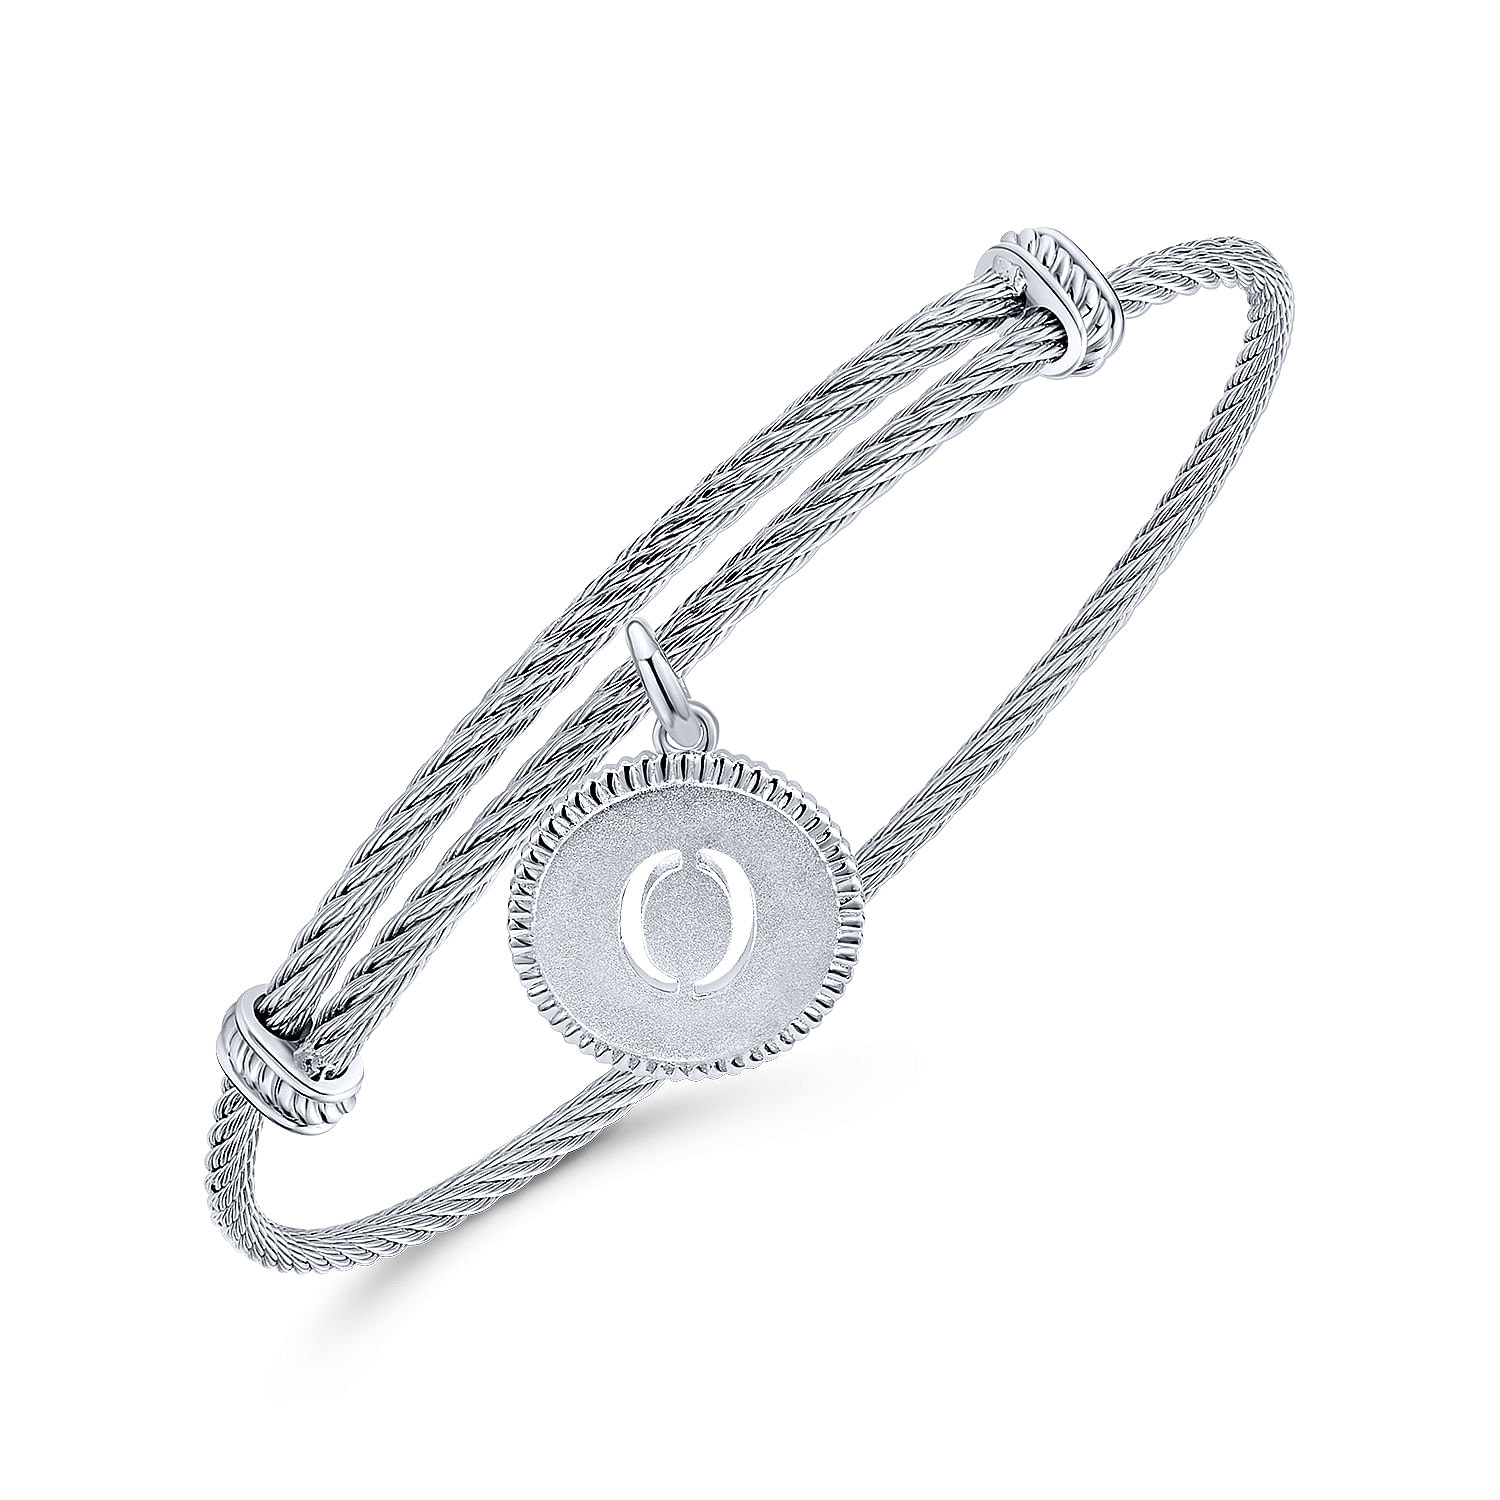 Adjustable Twisted Cable Stainless Steel Bangle with Sterling Silver O Initial Charm